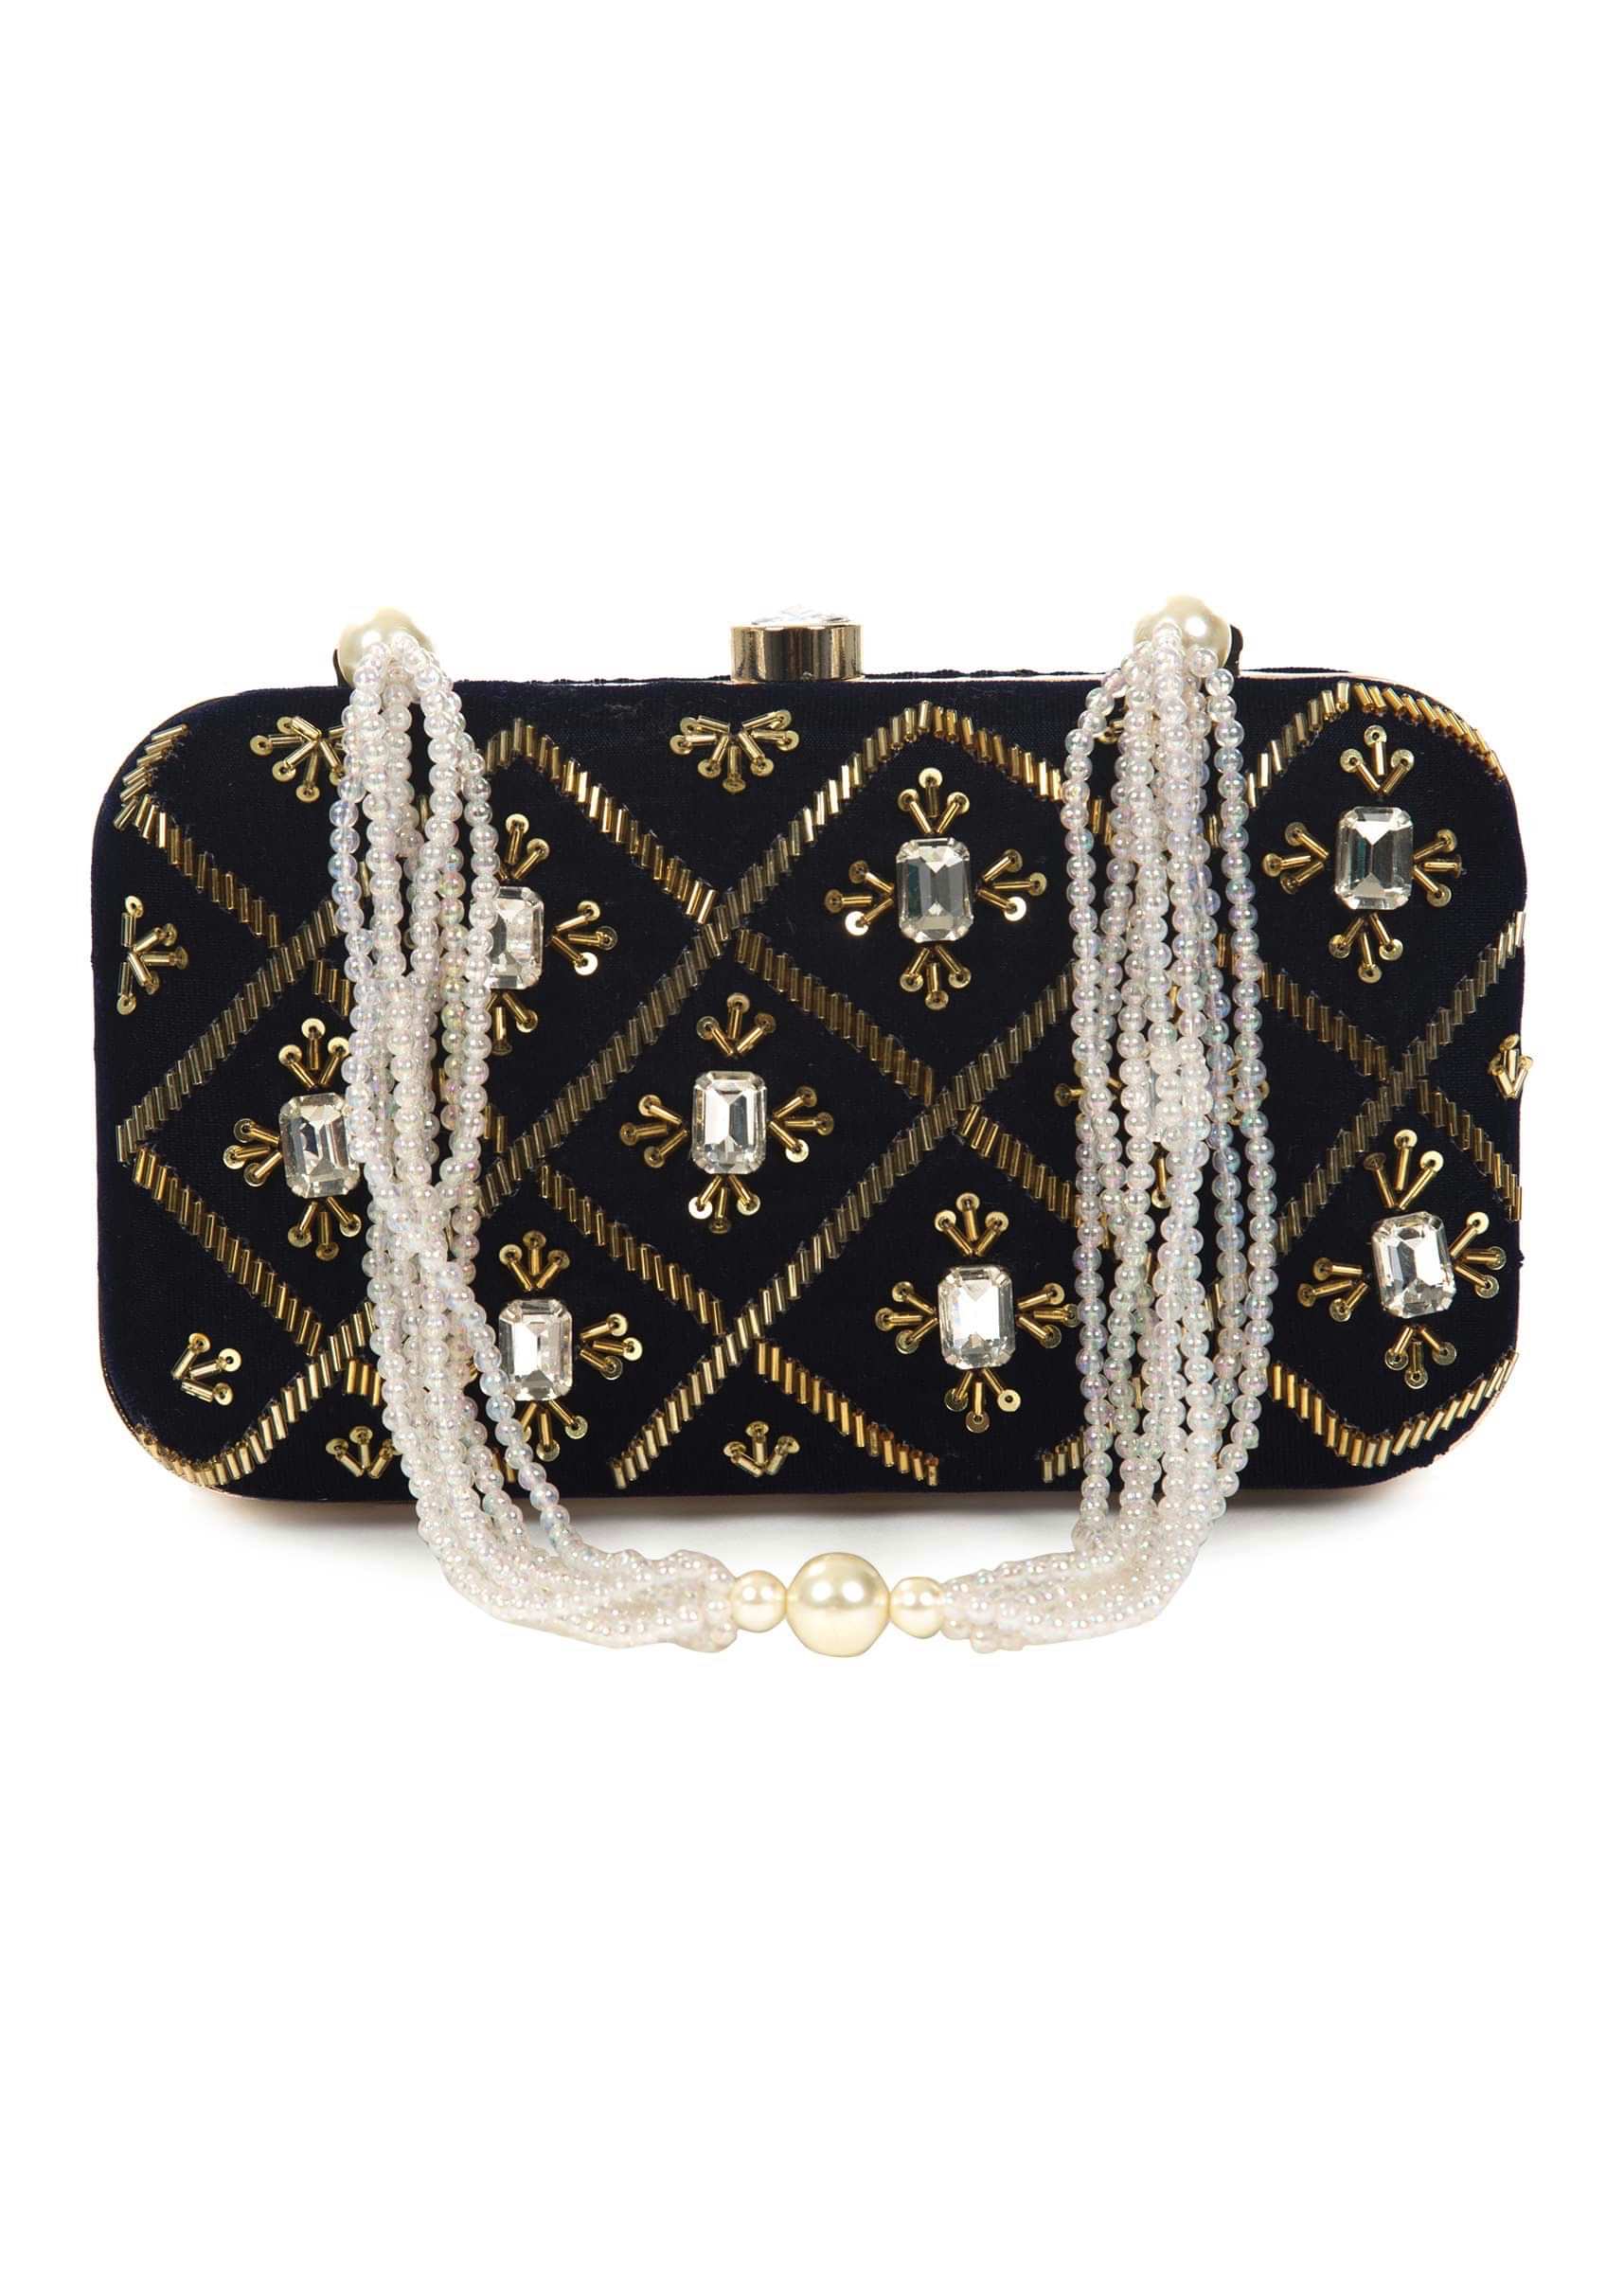 Black hand embroidered capsule clutch